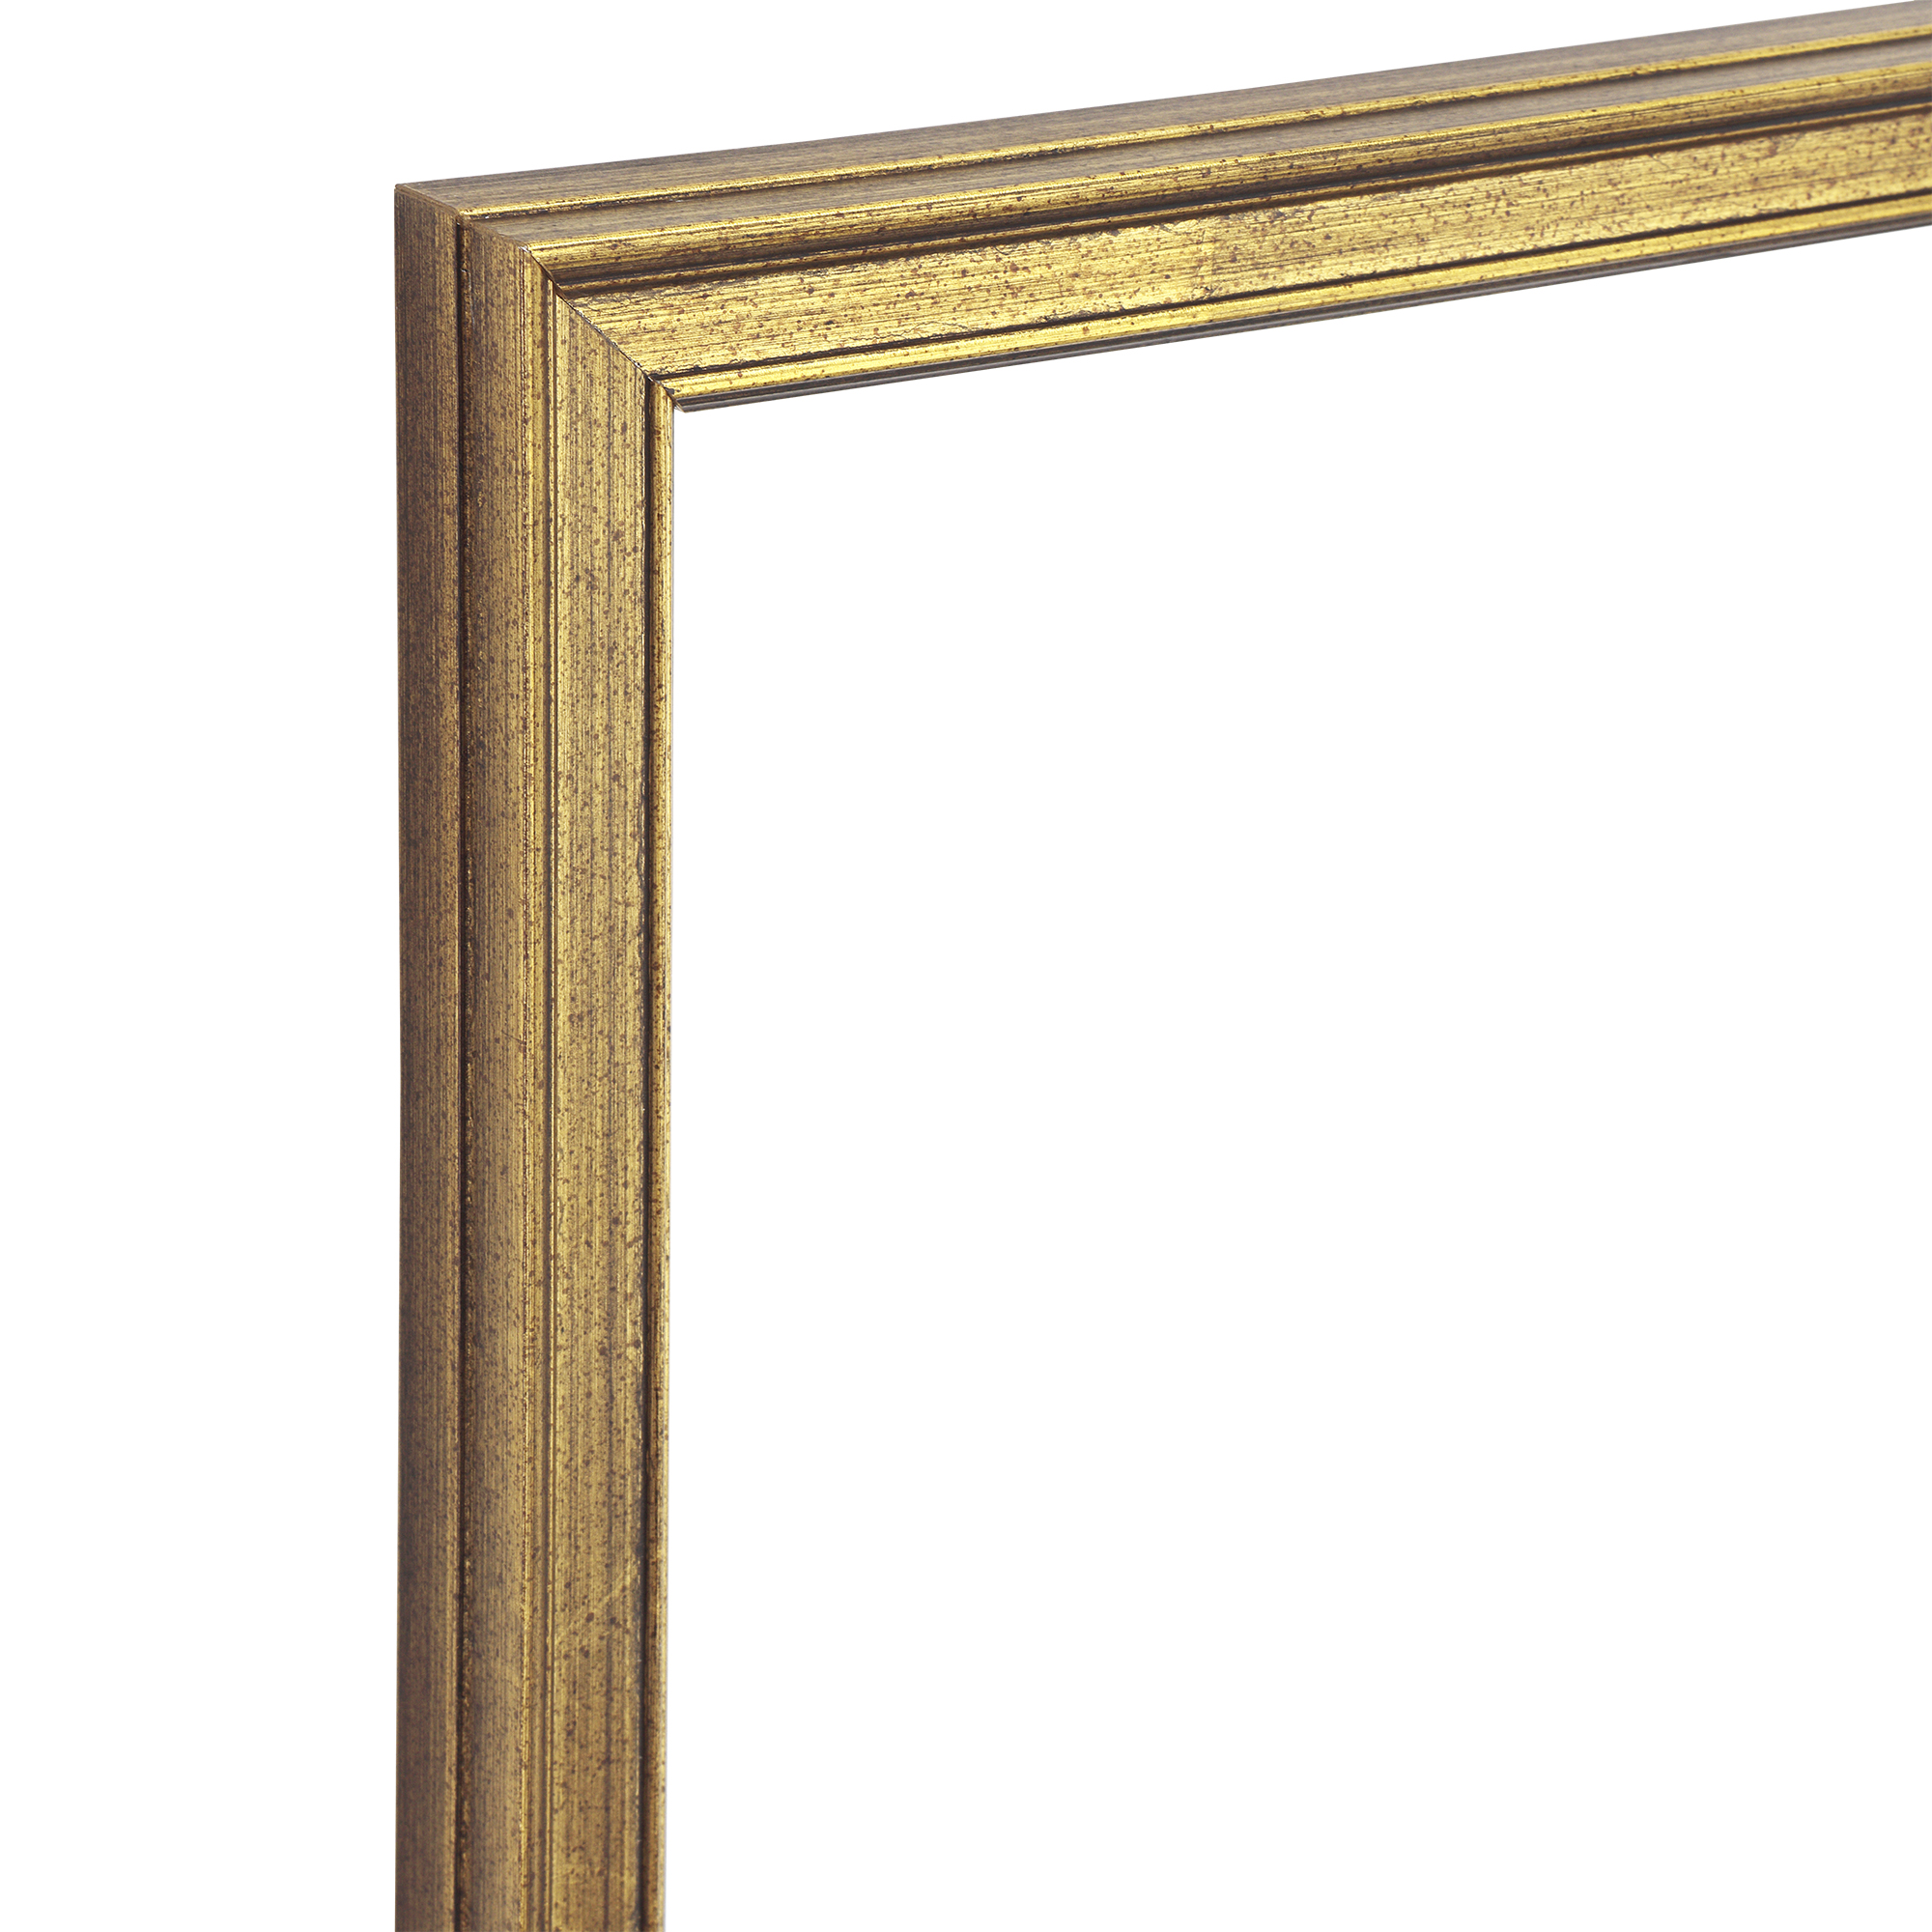 MUseum Collection Piccadilly Artist Vintage Picture Frames - 16x20 Gold - 6 Pack of Frames for 3/4 Thick Canvas, Paper and Panels, Museum Quality Wooden Antique Photo Frame - image 2 of 4